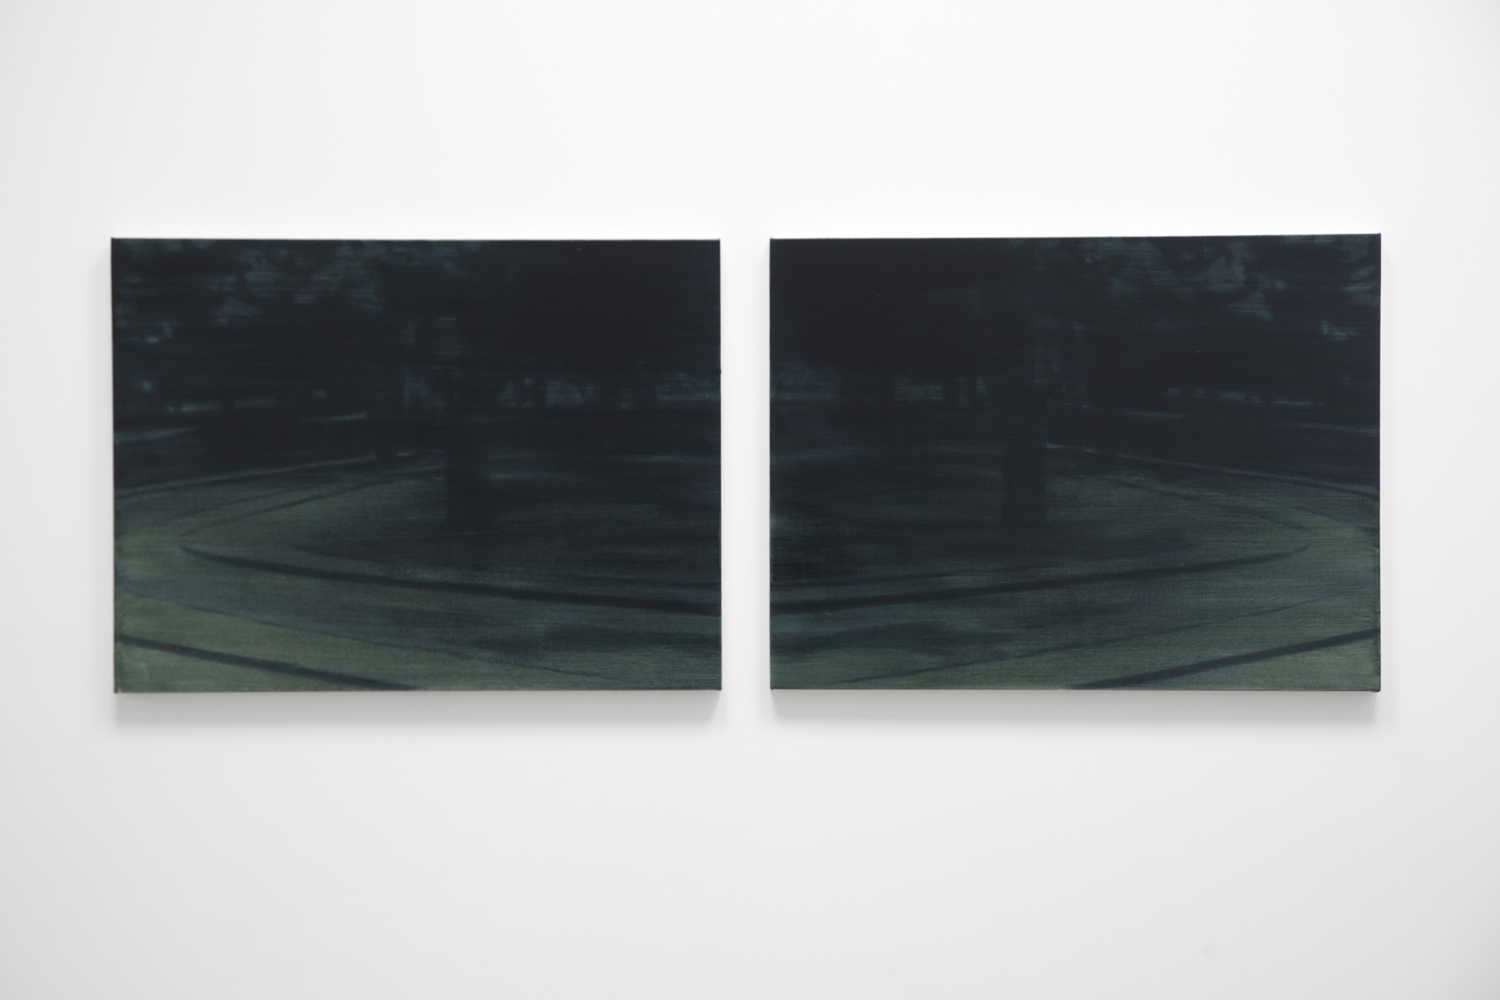   Roundabout (large dark mirror)  2018 diptych; oil on canvas on panel 30 x 40 inches each 